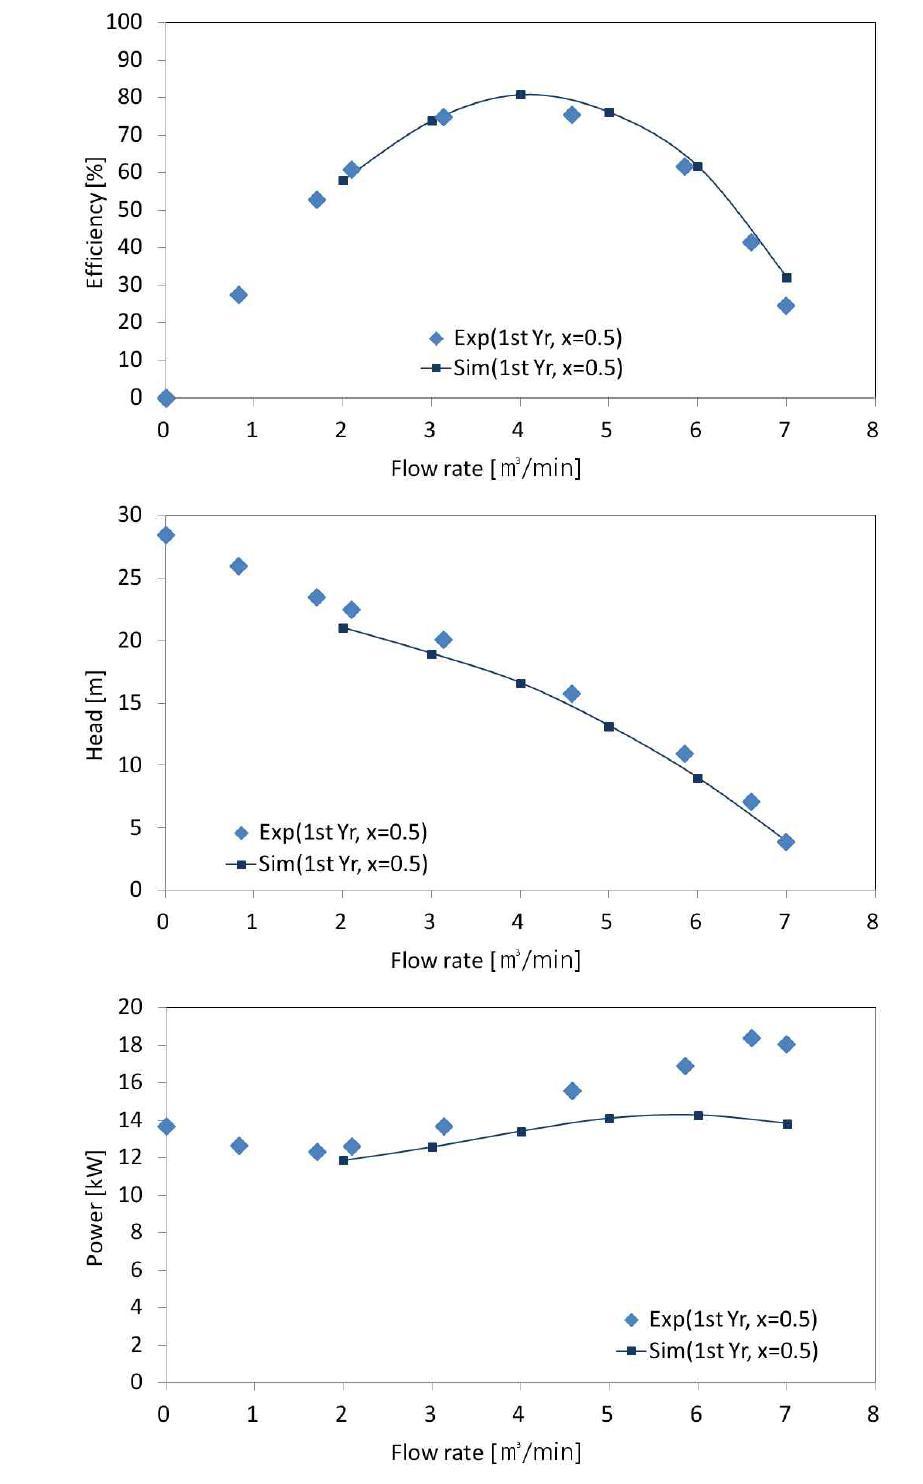 Comparison between simulation and experiment results.